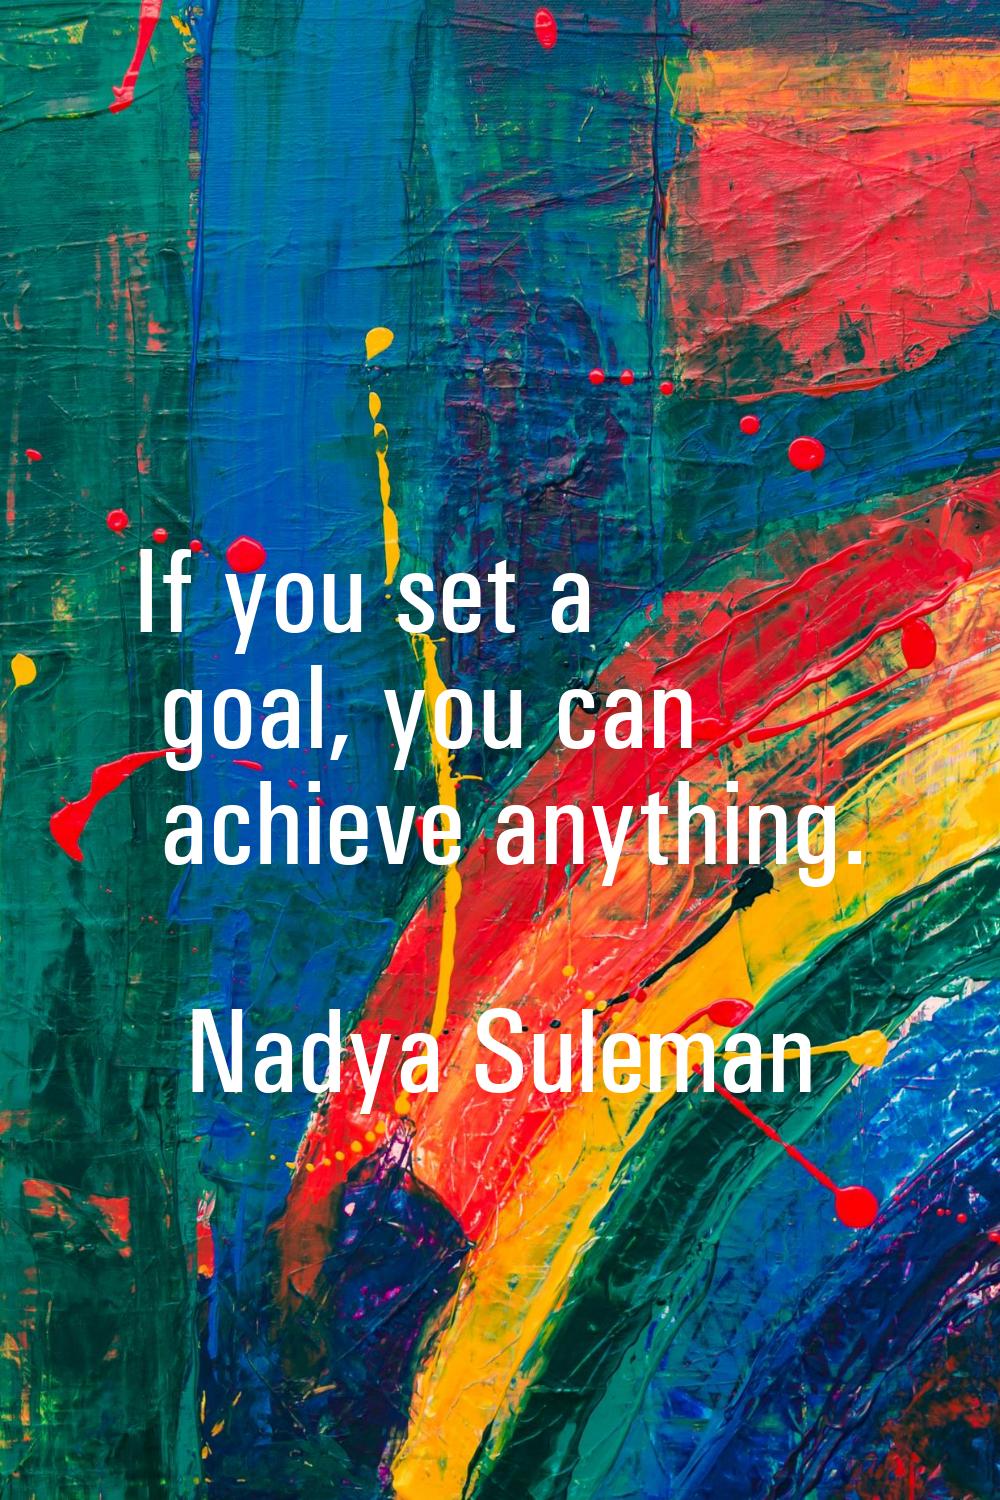 If you set a goal, you can achieve anything.